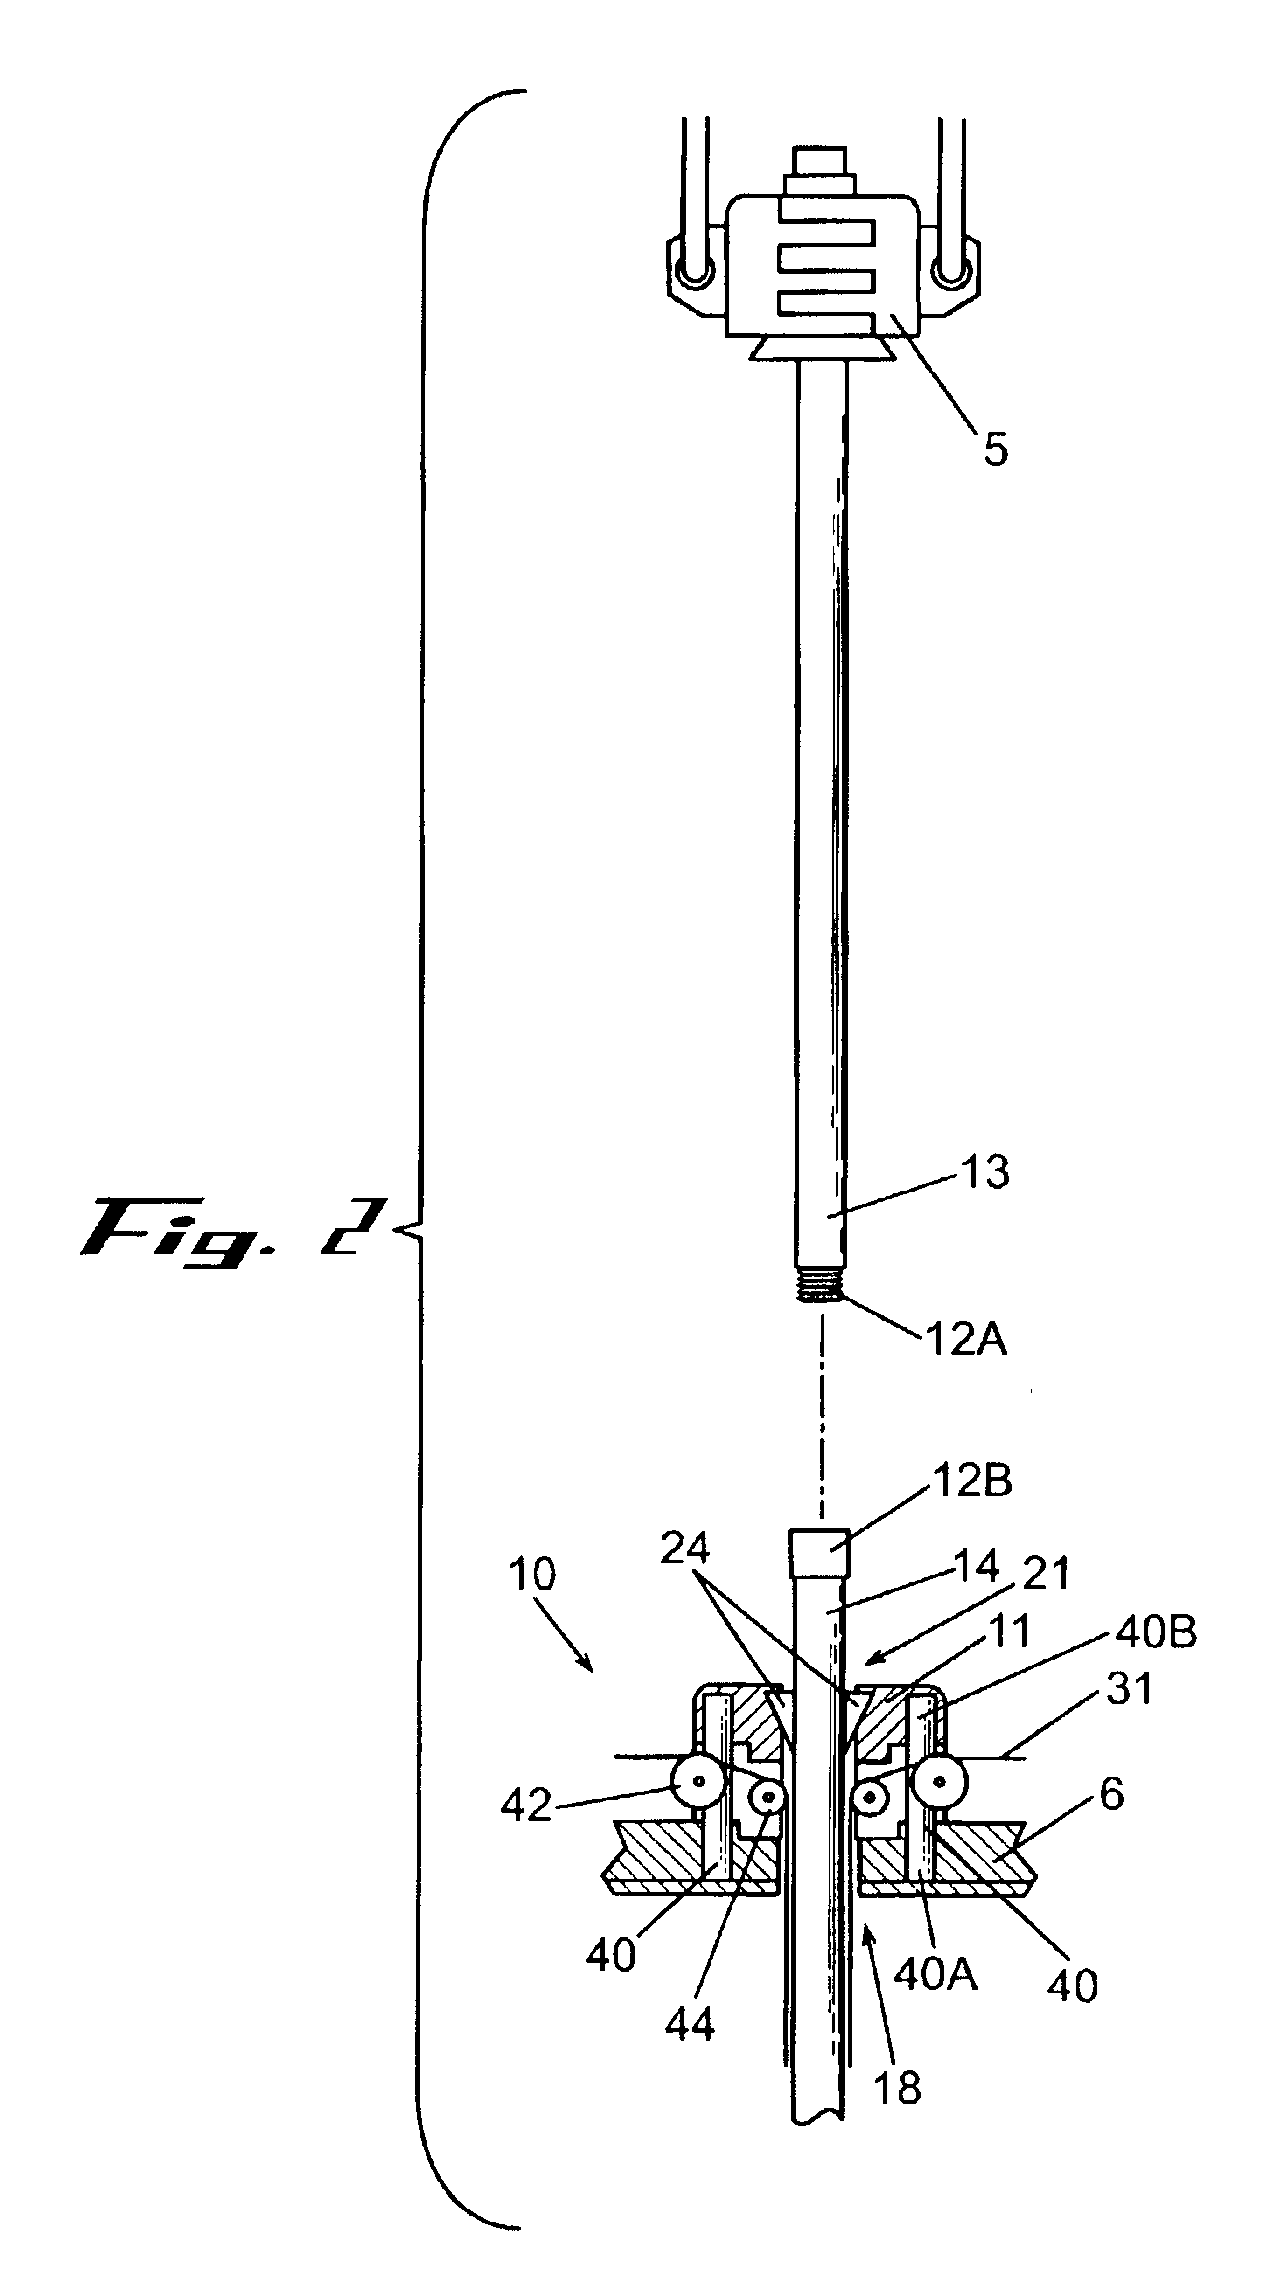 Method and apparatus for installing control lines in a well